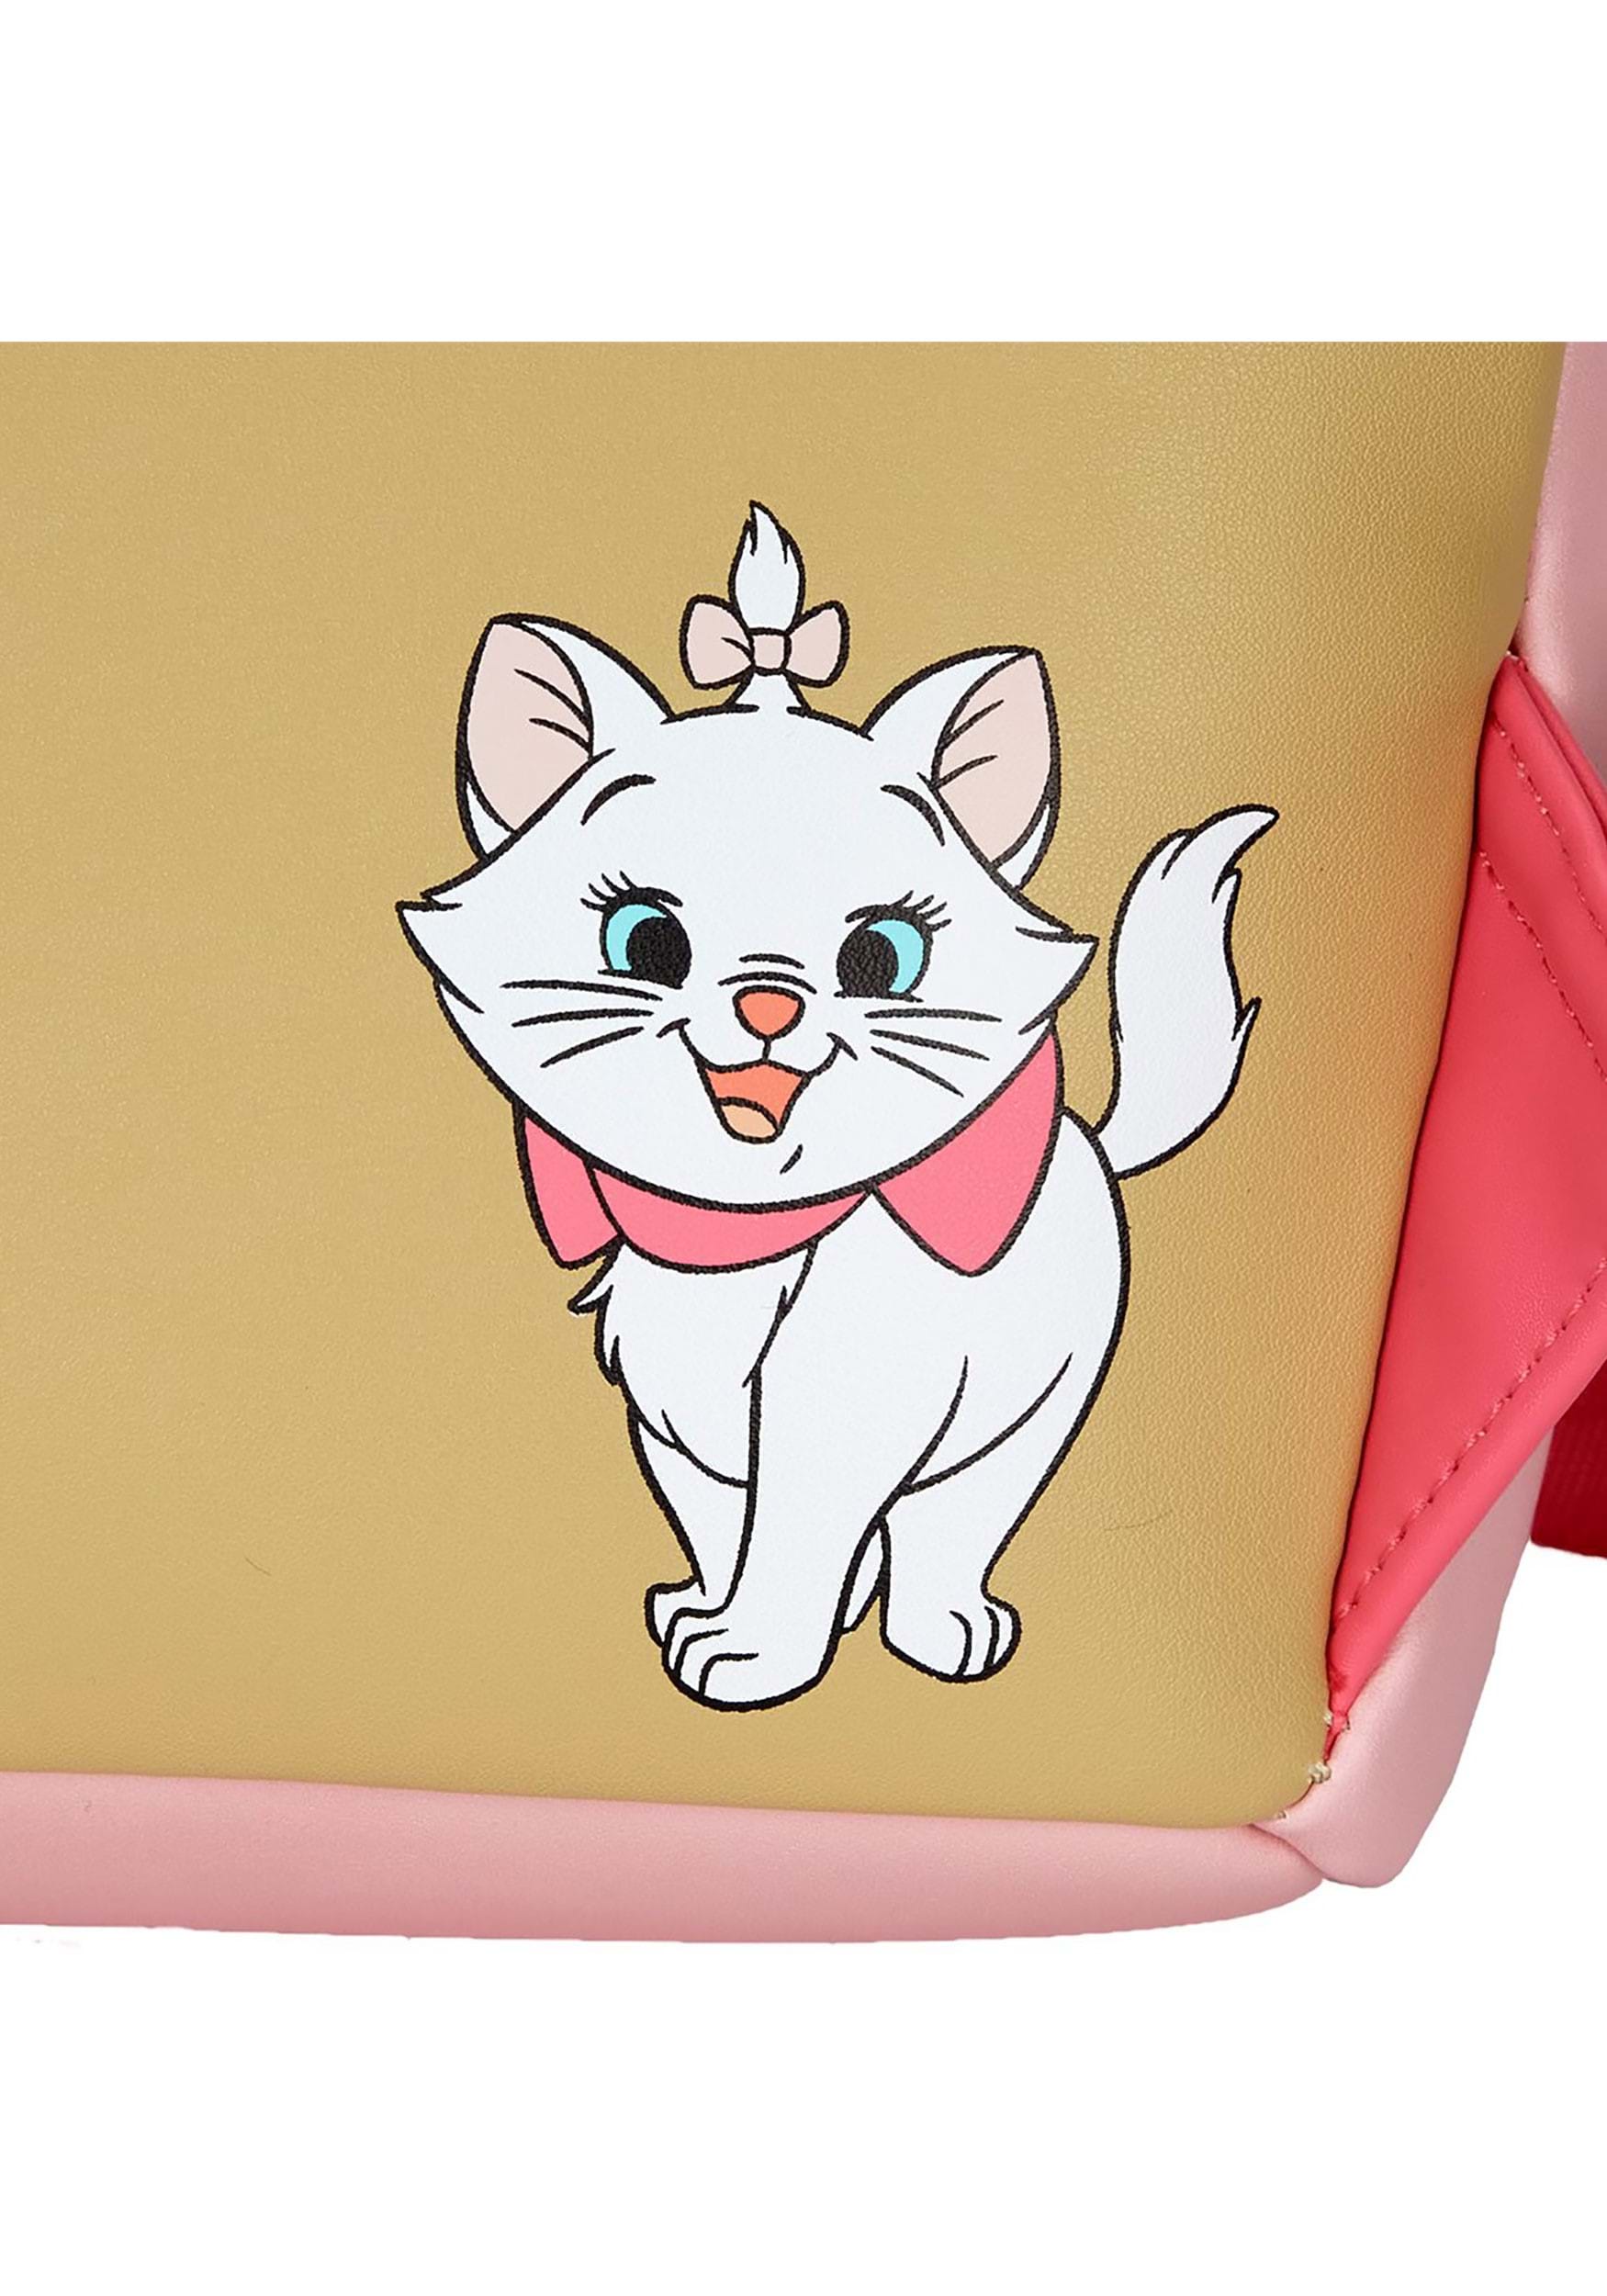 Buy The Aristocats Marie House Mini Backpack at Loungefly.